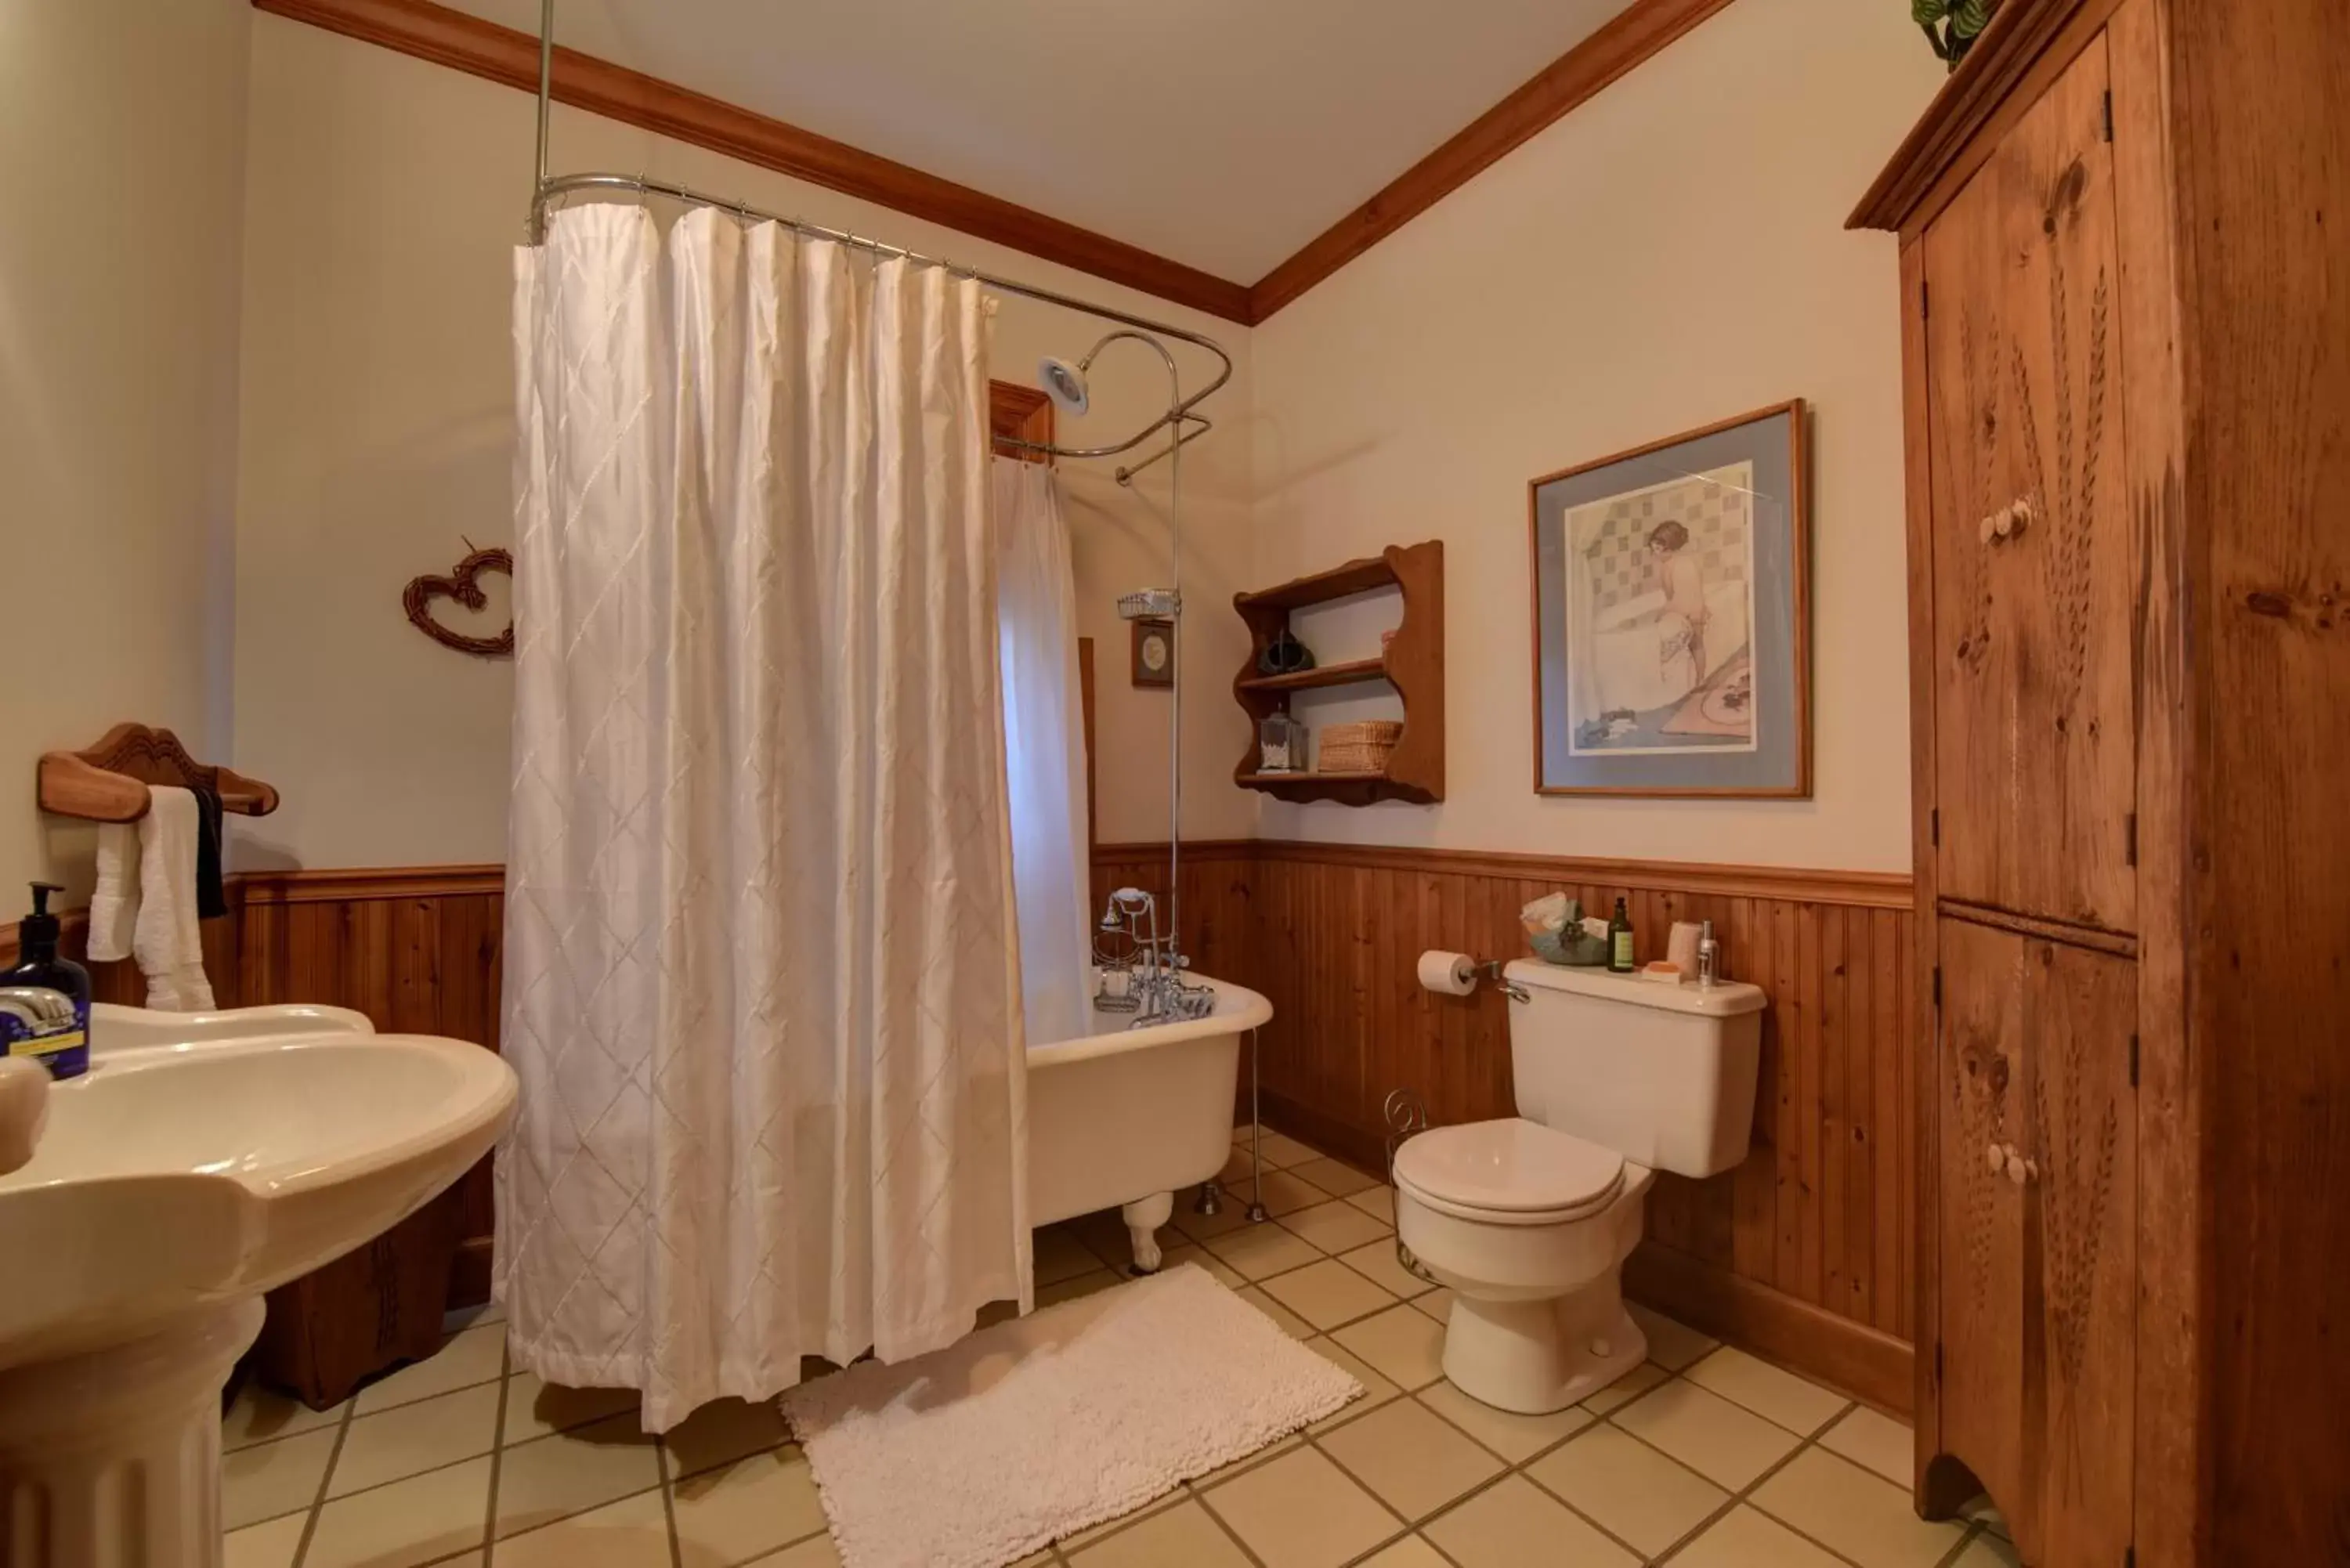 Bathroom in A Chateau on the Bayou Bed & Breakfast